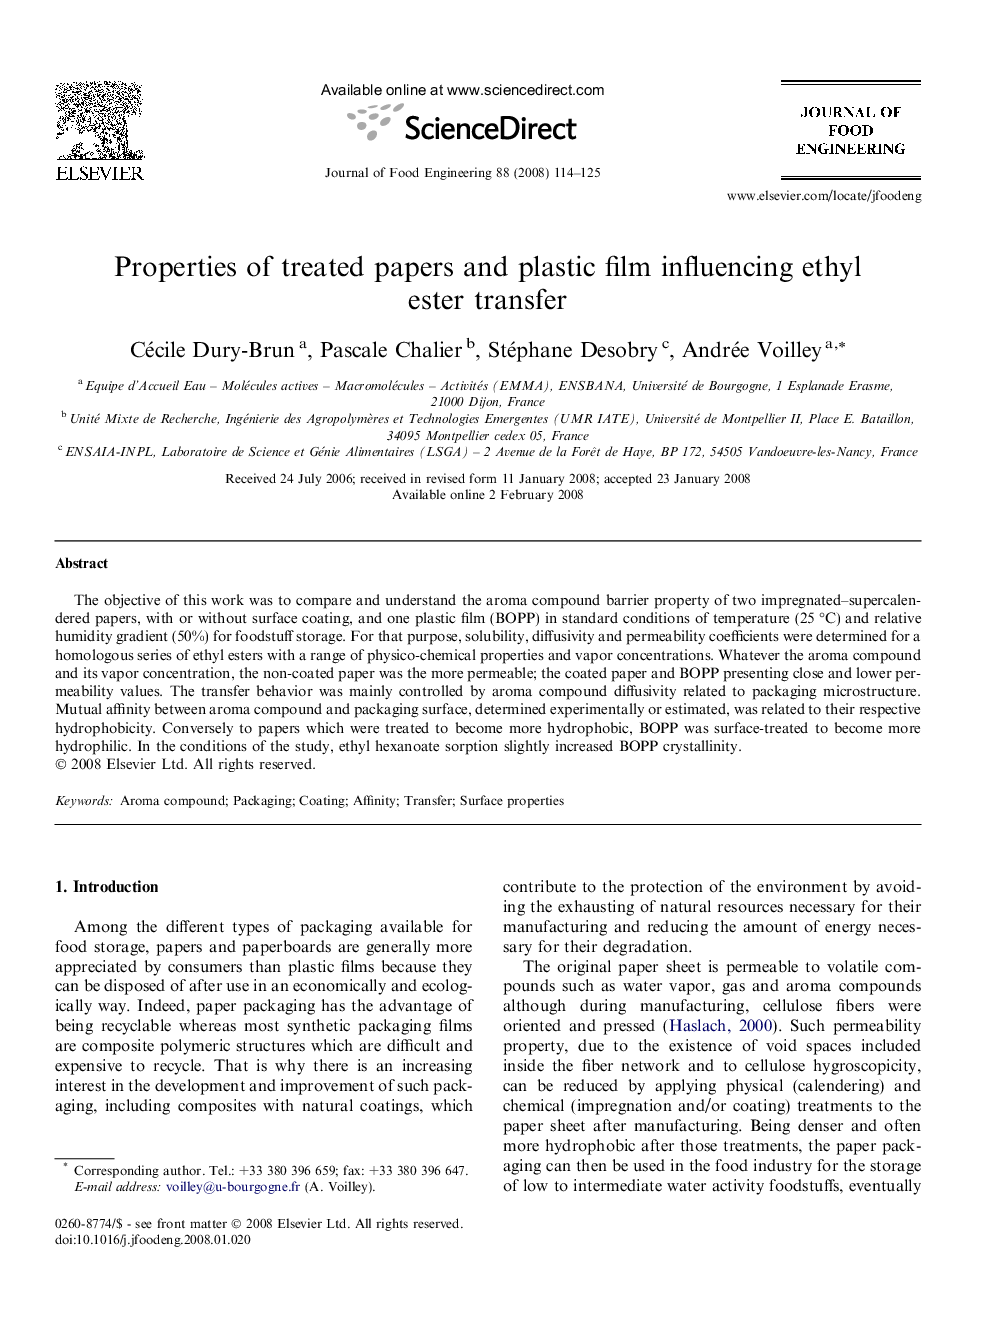 Properties of treated papers and plastic film influencing ethyl ester transfer